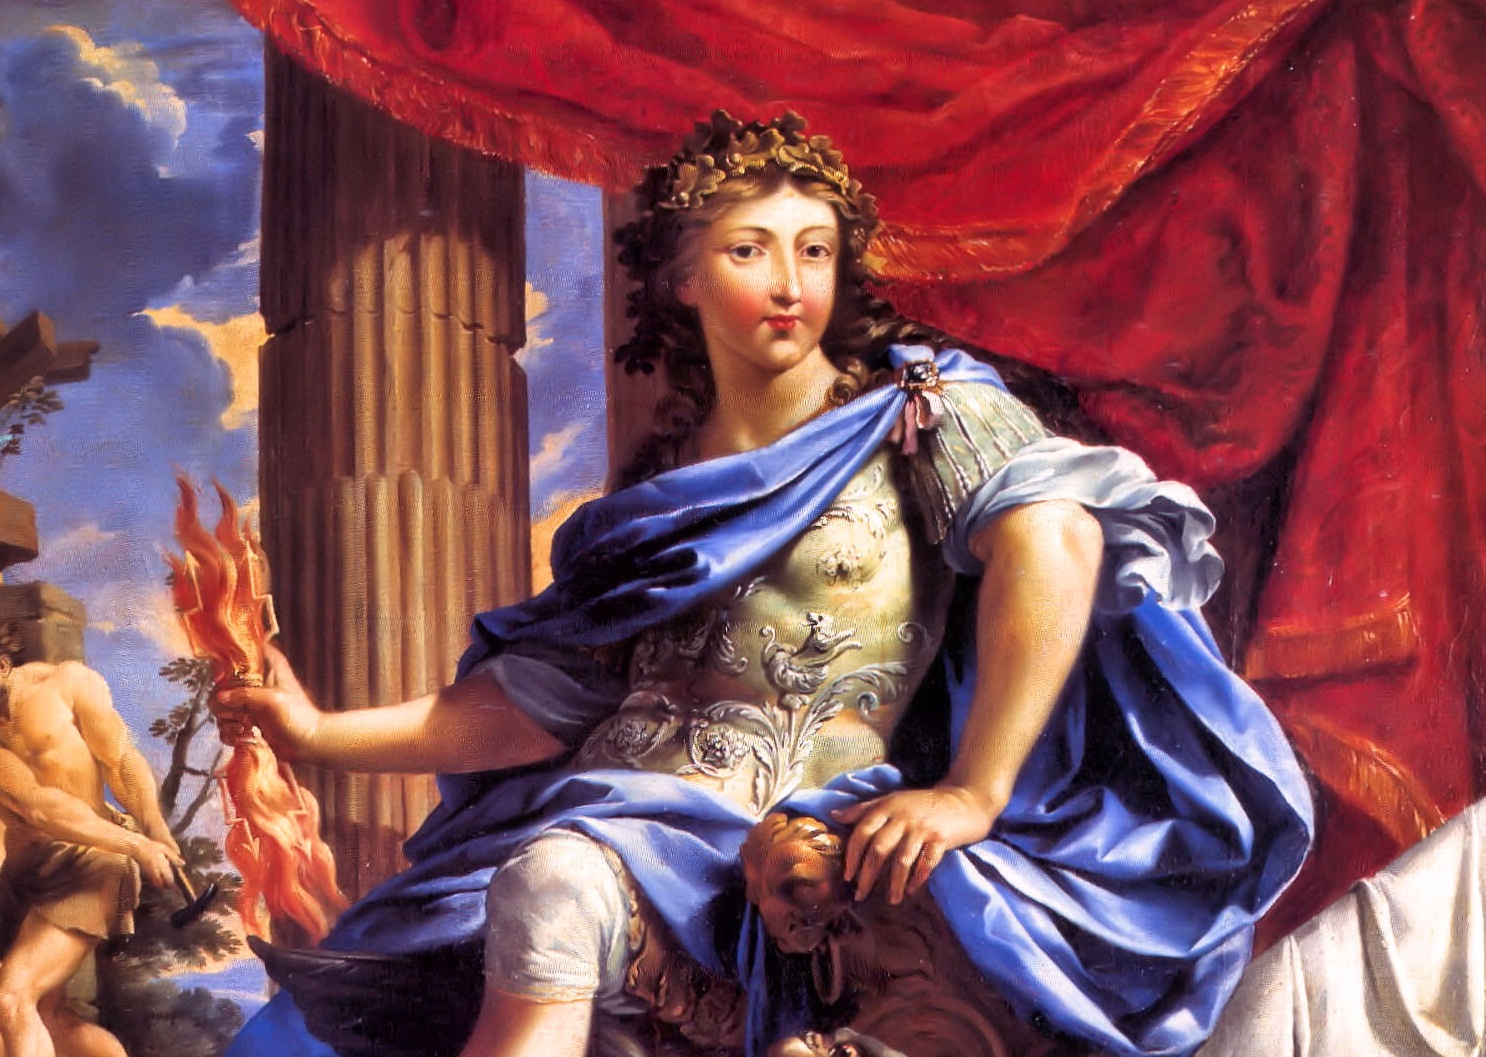 1638: Birth of the French King Louis XIV – the Most Powerful Ruler in Europe